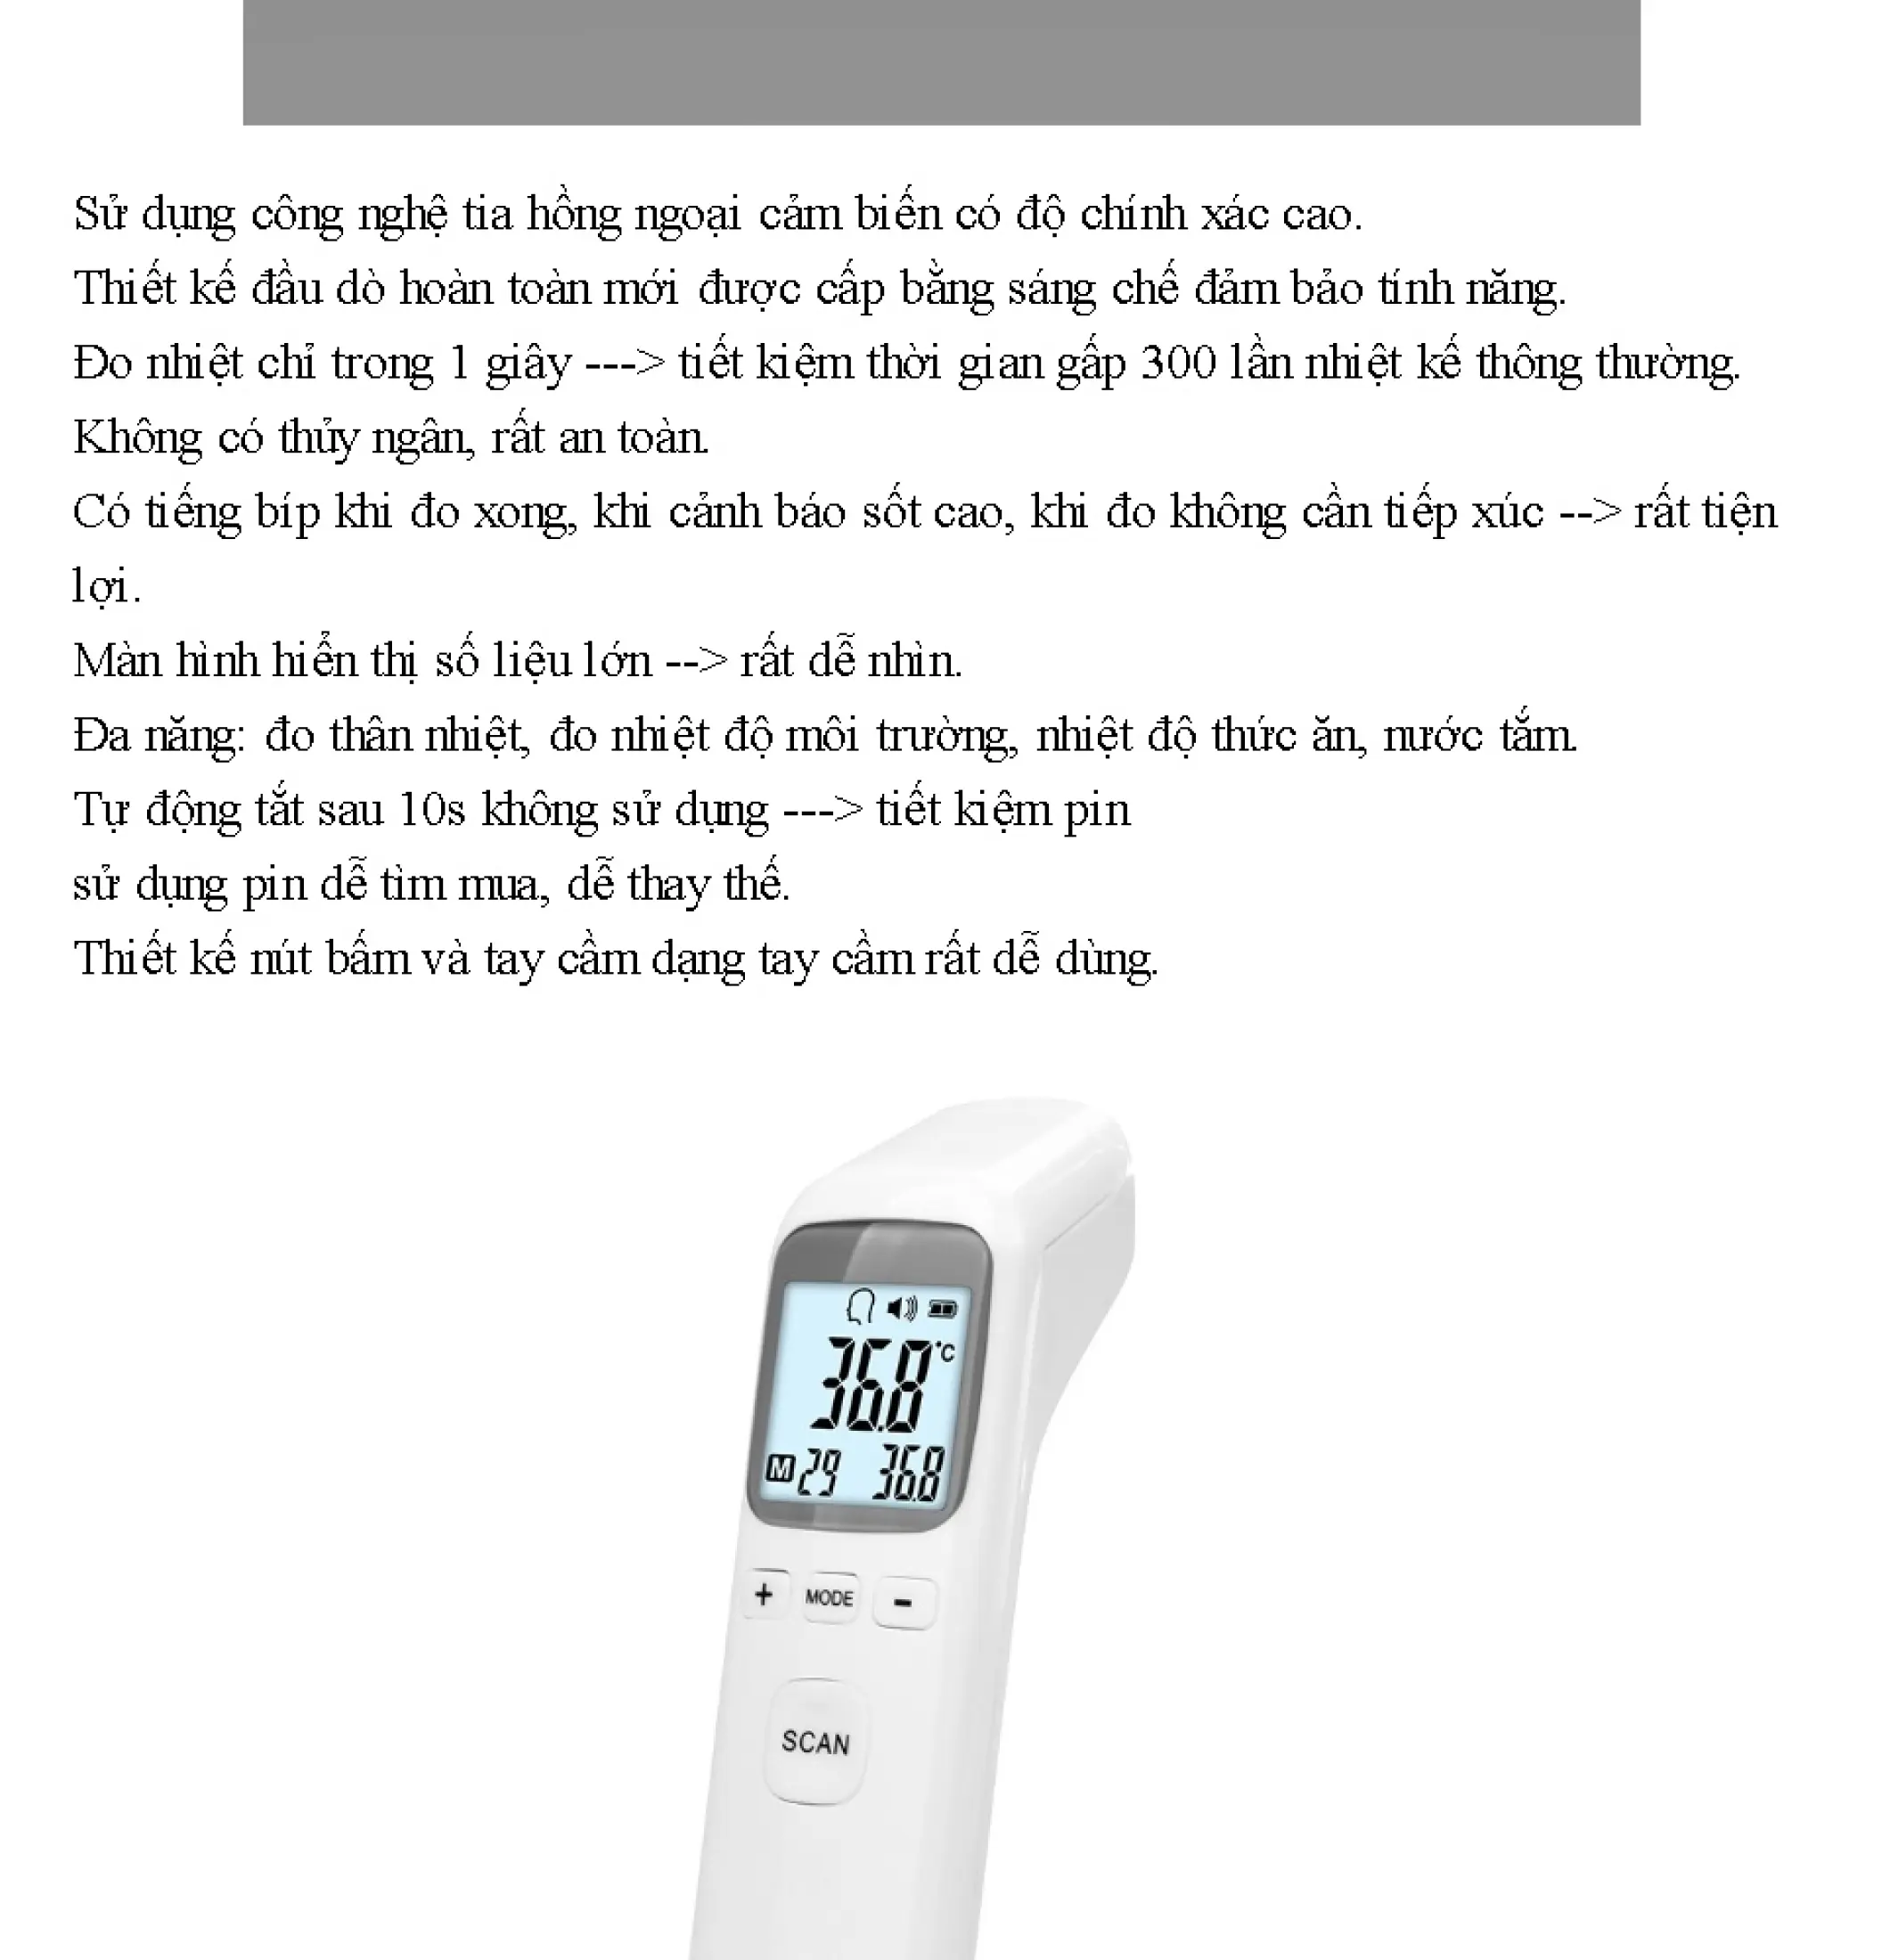 Nhiệt kế hồng ngoại: Take temperature measurements quickly and accurately with hong ngoai infrared thermometers. These electronic devices are perfect for a wide variety of applications, including food safety, temperature monitoring in industrial settings, and much more. Experience the convenience and accuracy of hong ngoai thermometers today!